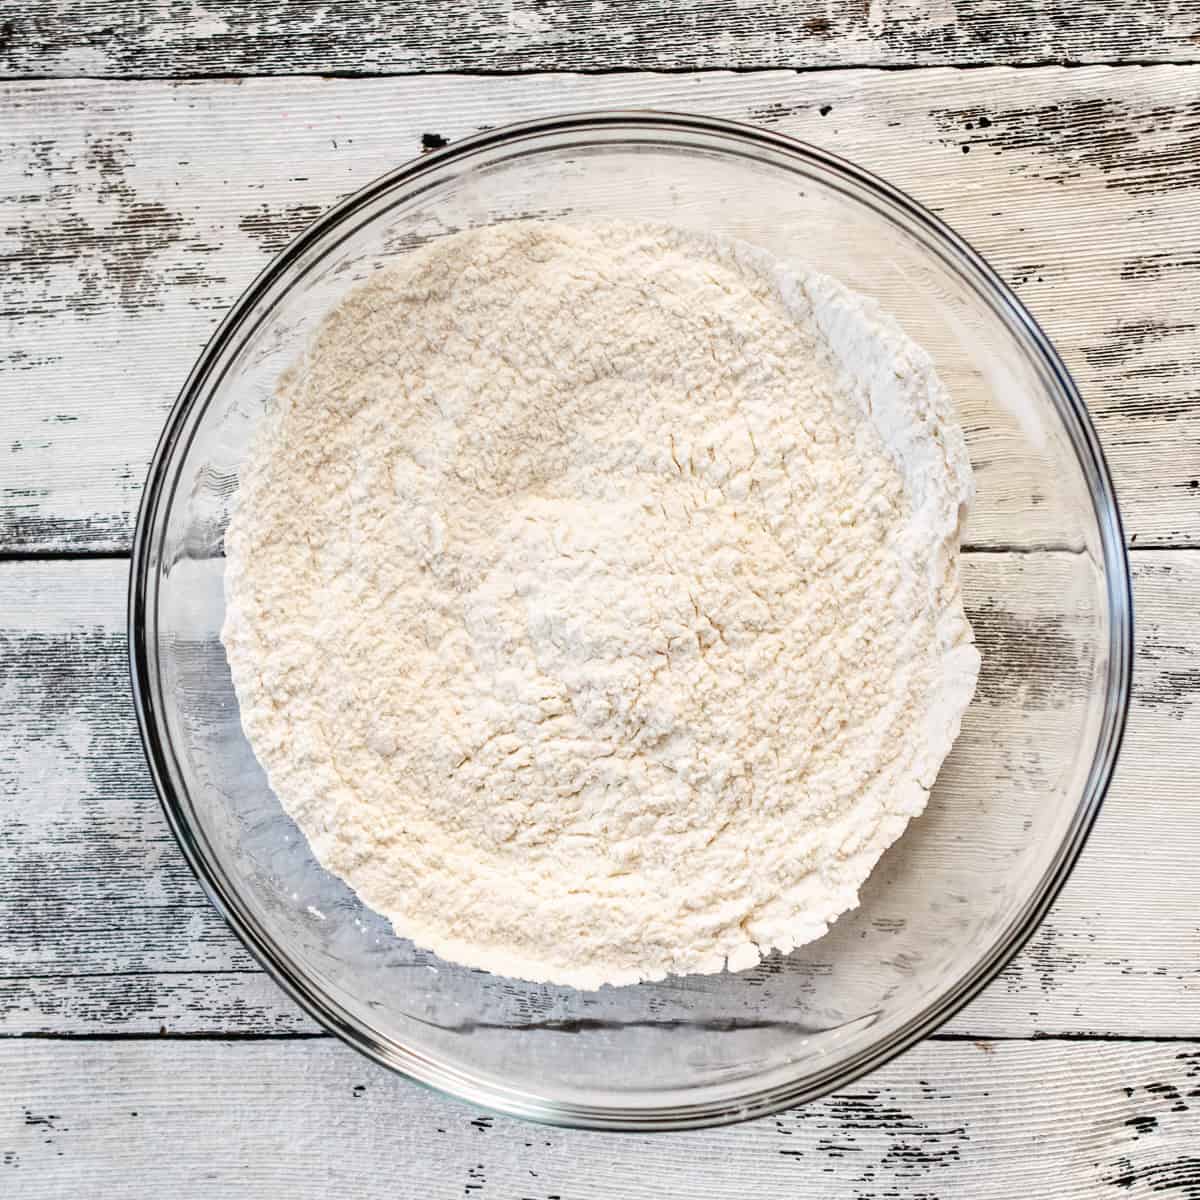 Flour, salt and baking powder whisked in a glass bowl.